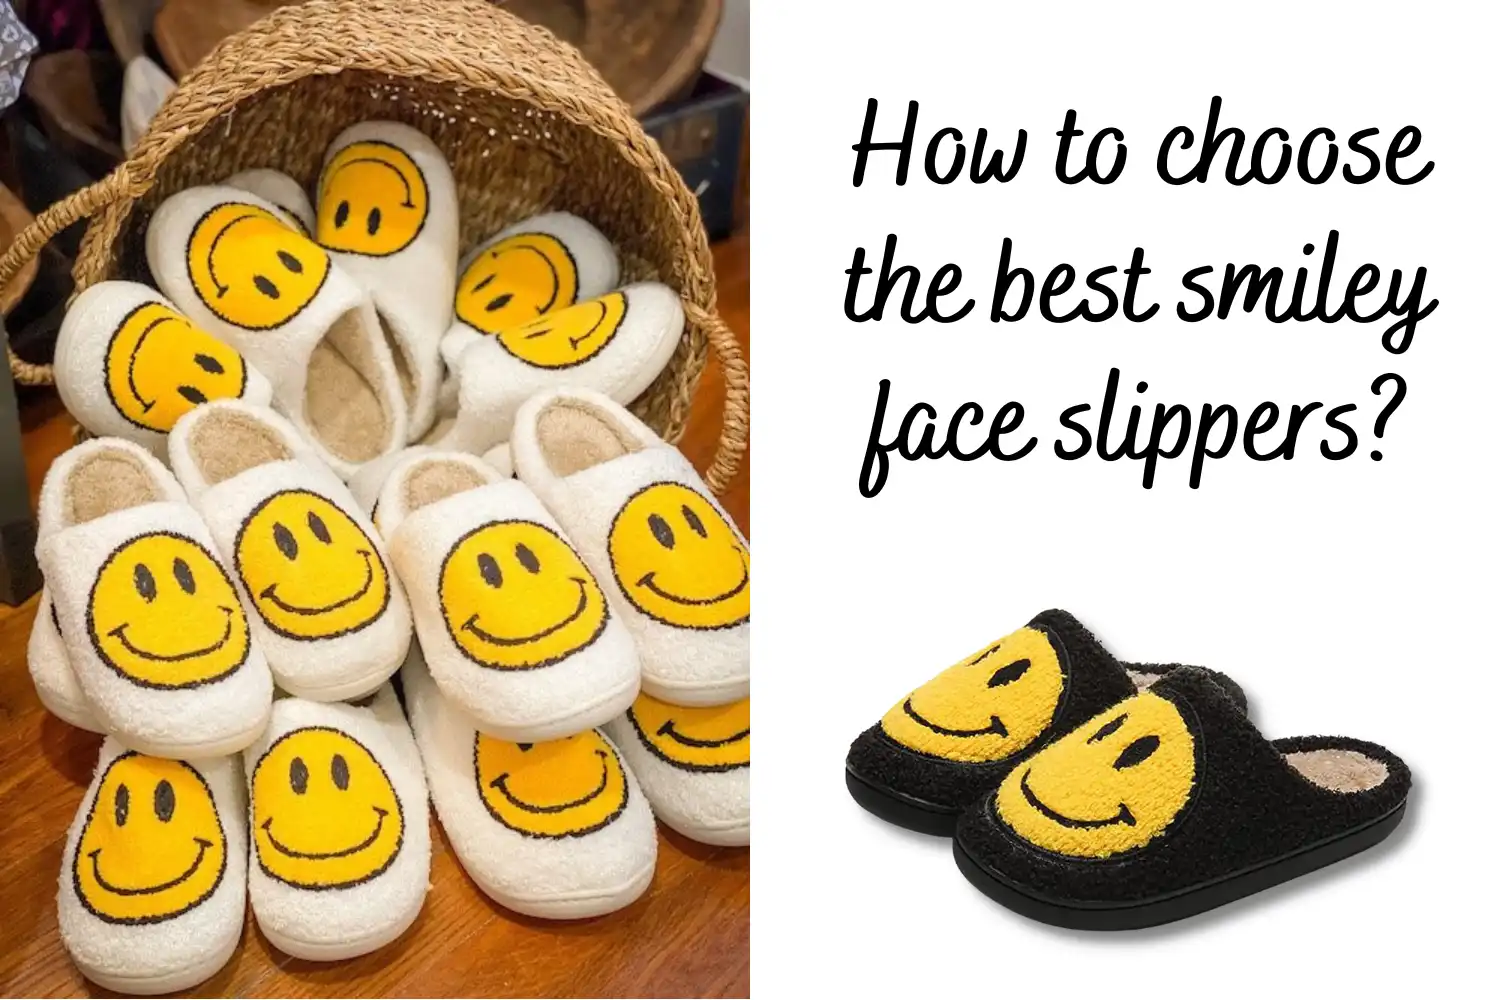 How to choose the best smiley face slippers?